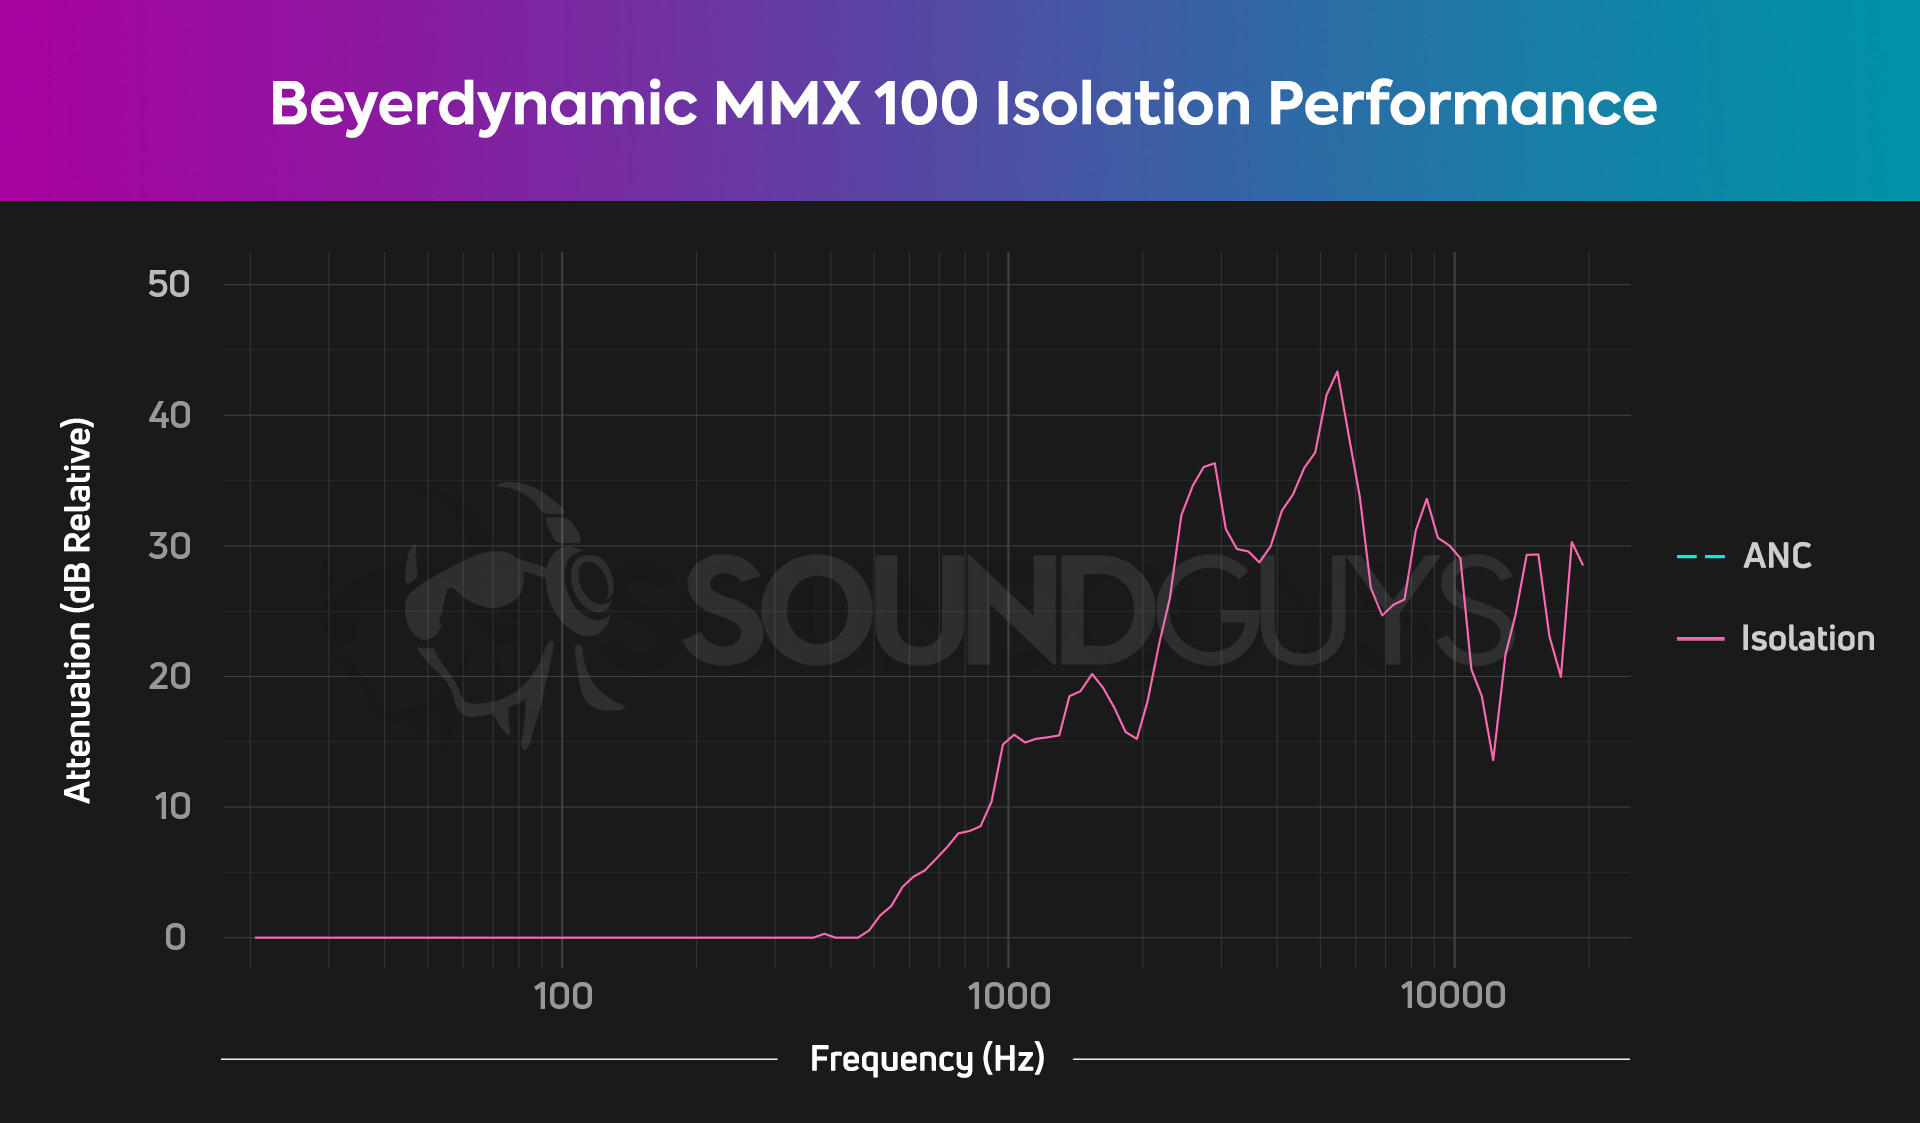 An isolation chart for the Beyerdynamic MMX 100 gaming headset, which shows very little isolation performance.